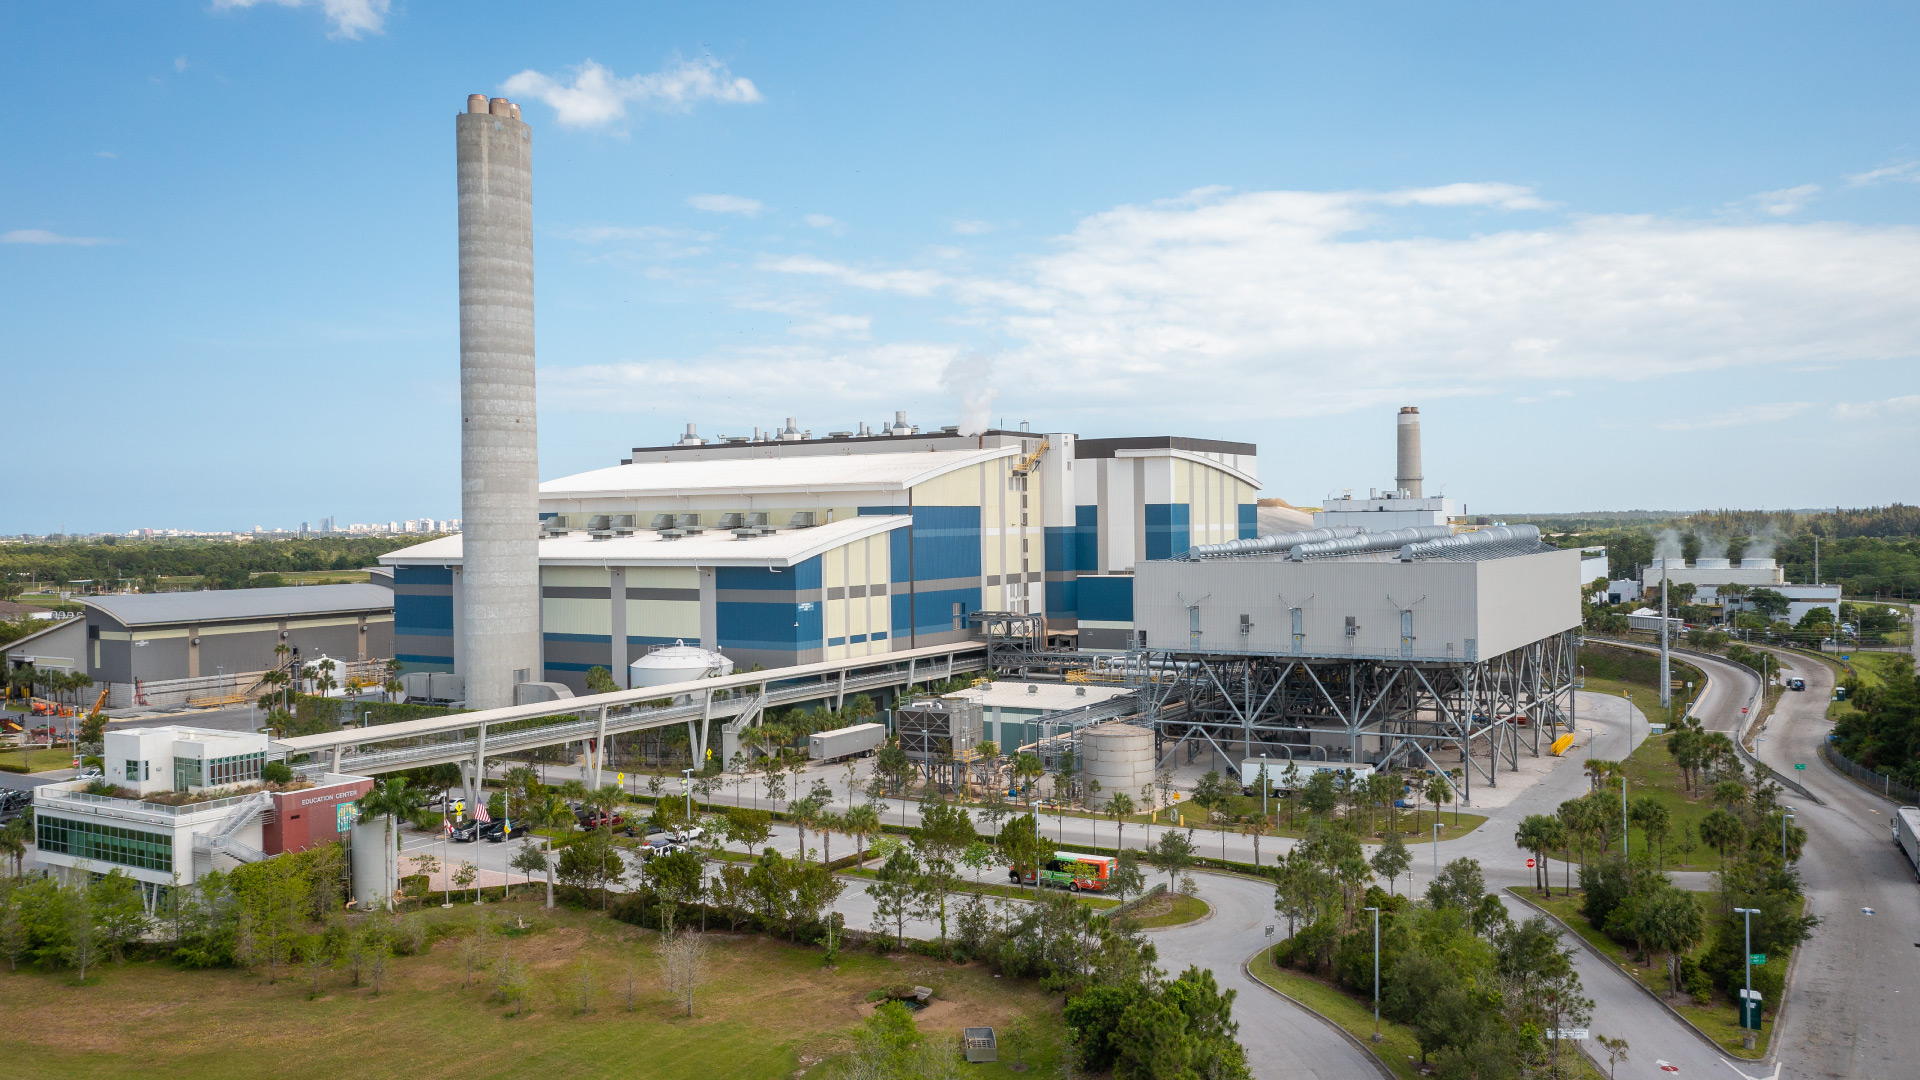 The Palm Beach Waste-to-Energy Facility